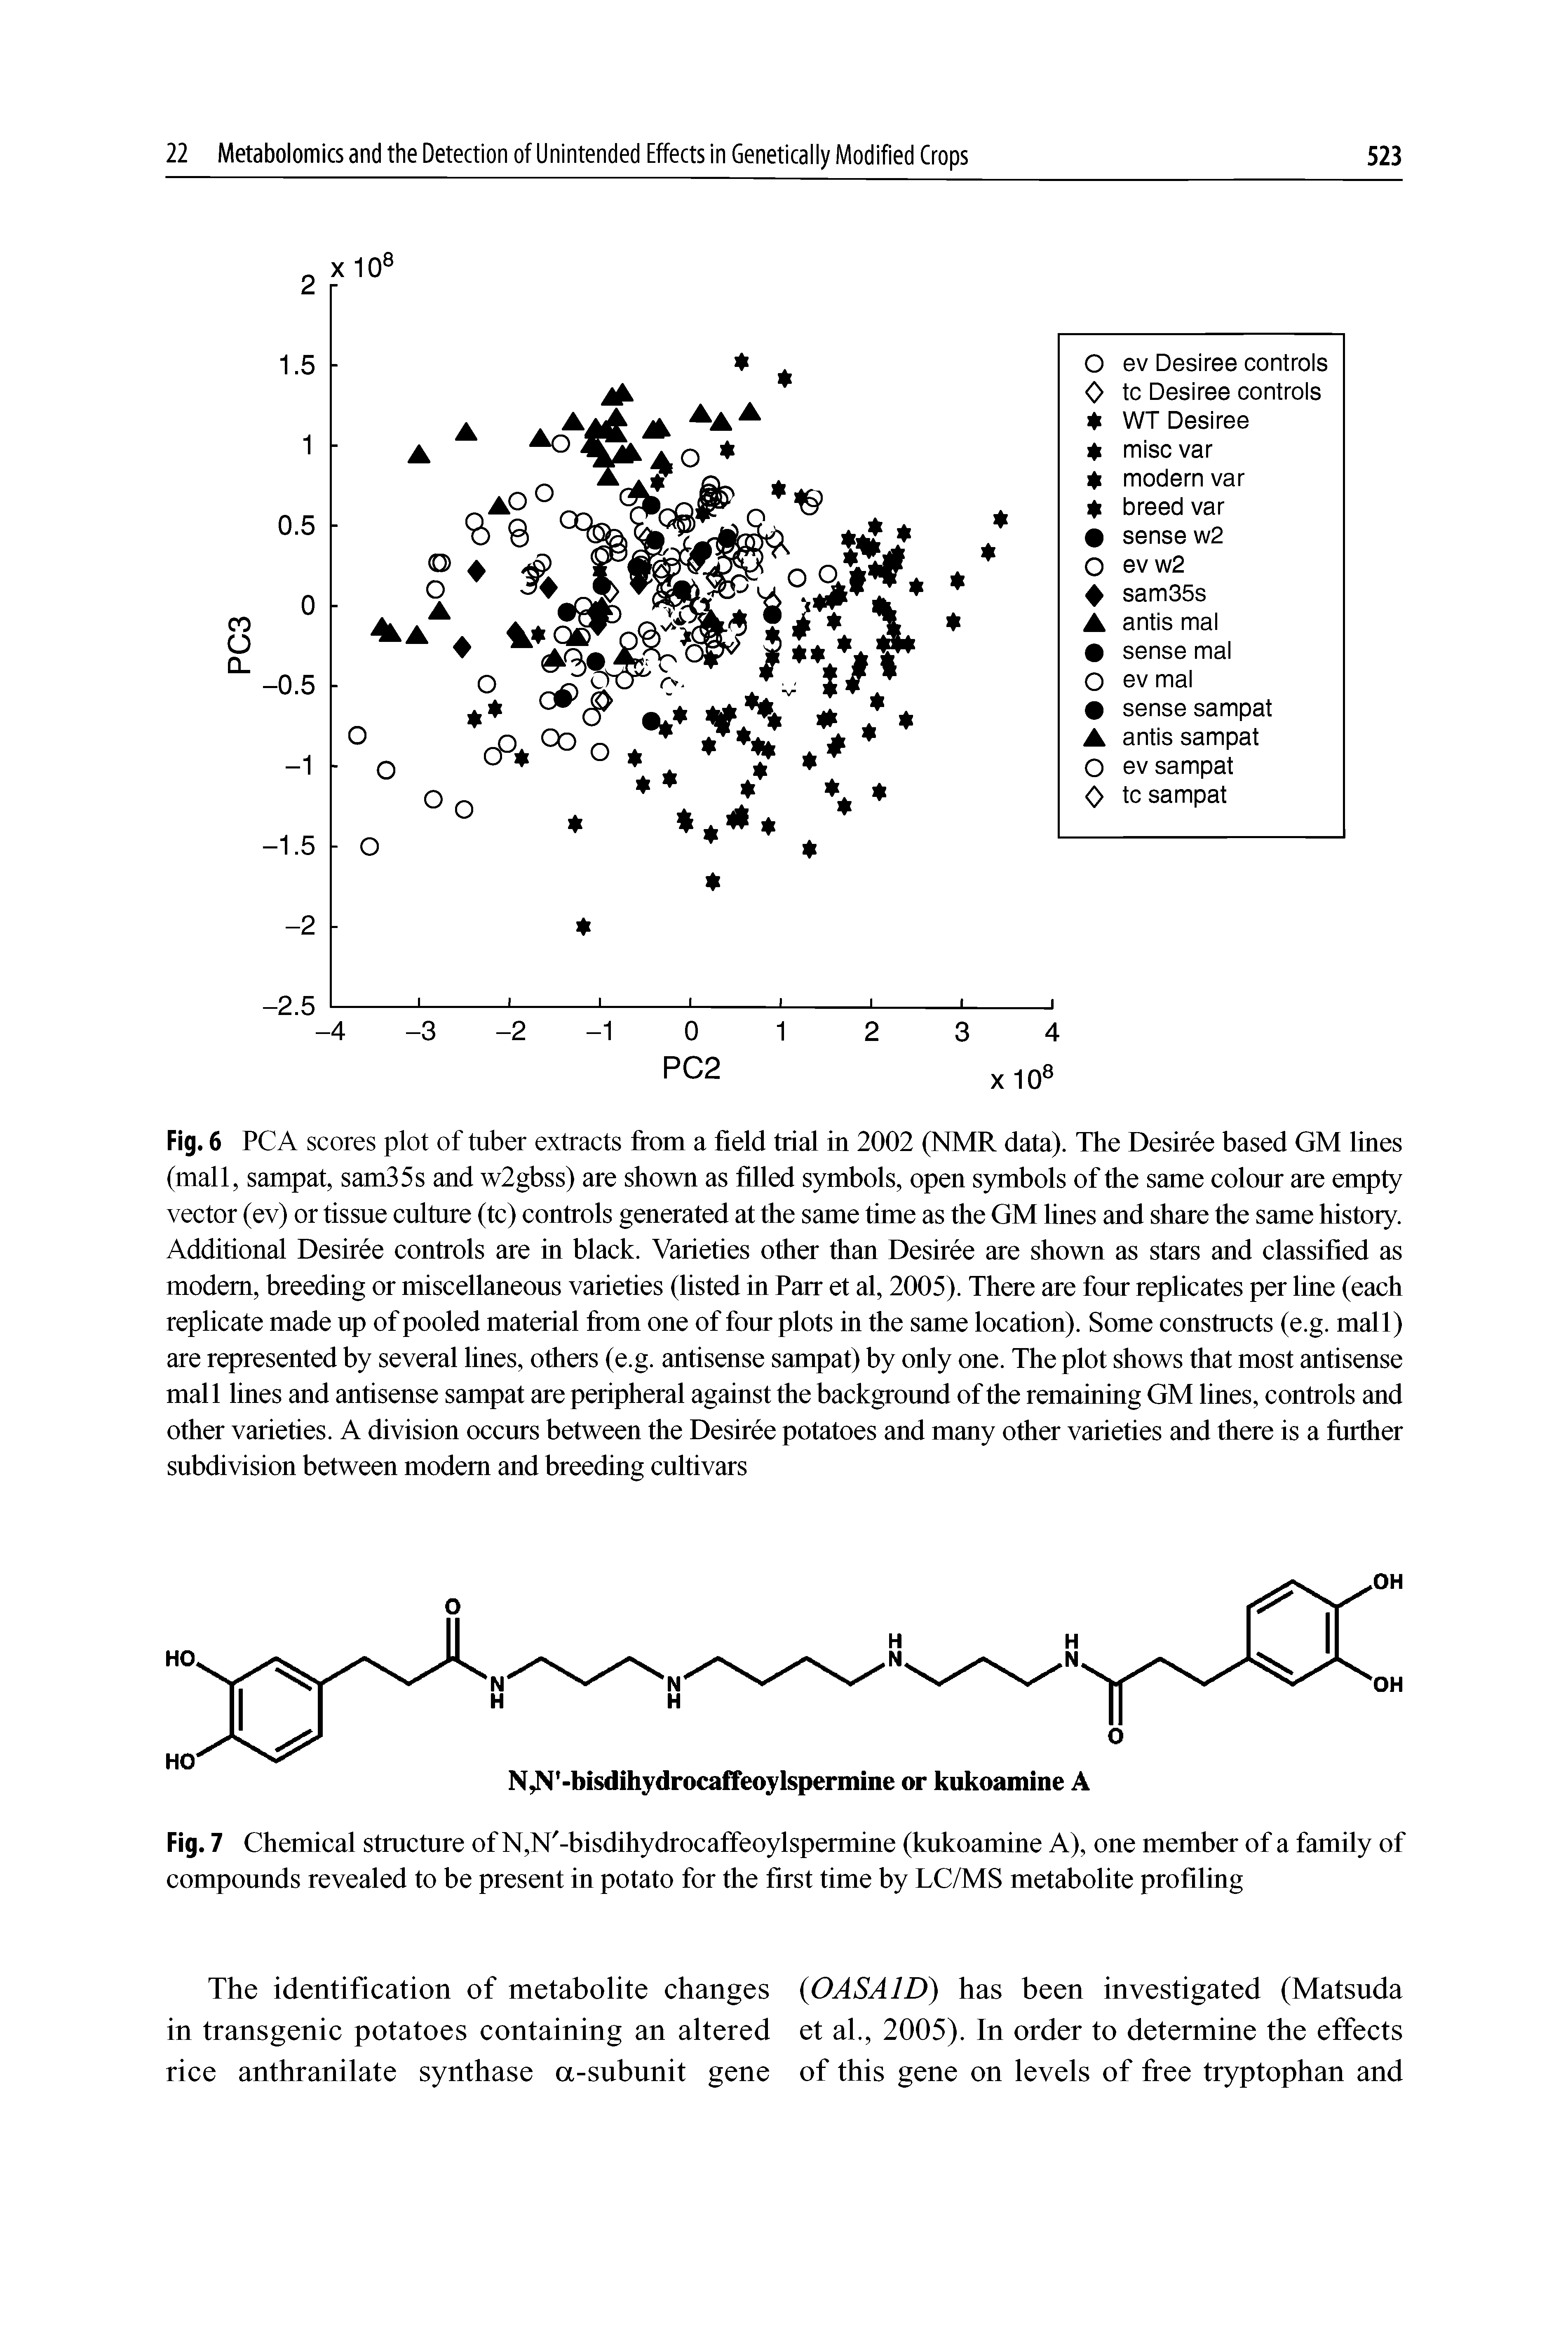 Fig. 7 Chemical structure of N,N -bisdihydrocaffeoylspermine (kukoamine A), one member of a family of compounds revealed to be present in potato for the first time by LC/MS metabolite profiling...